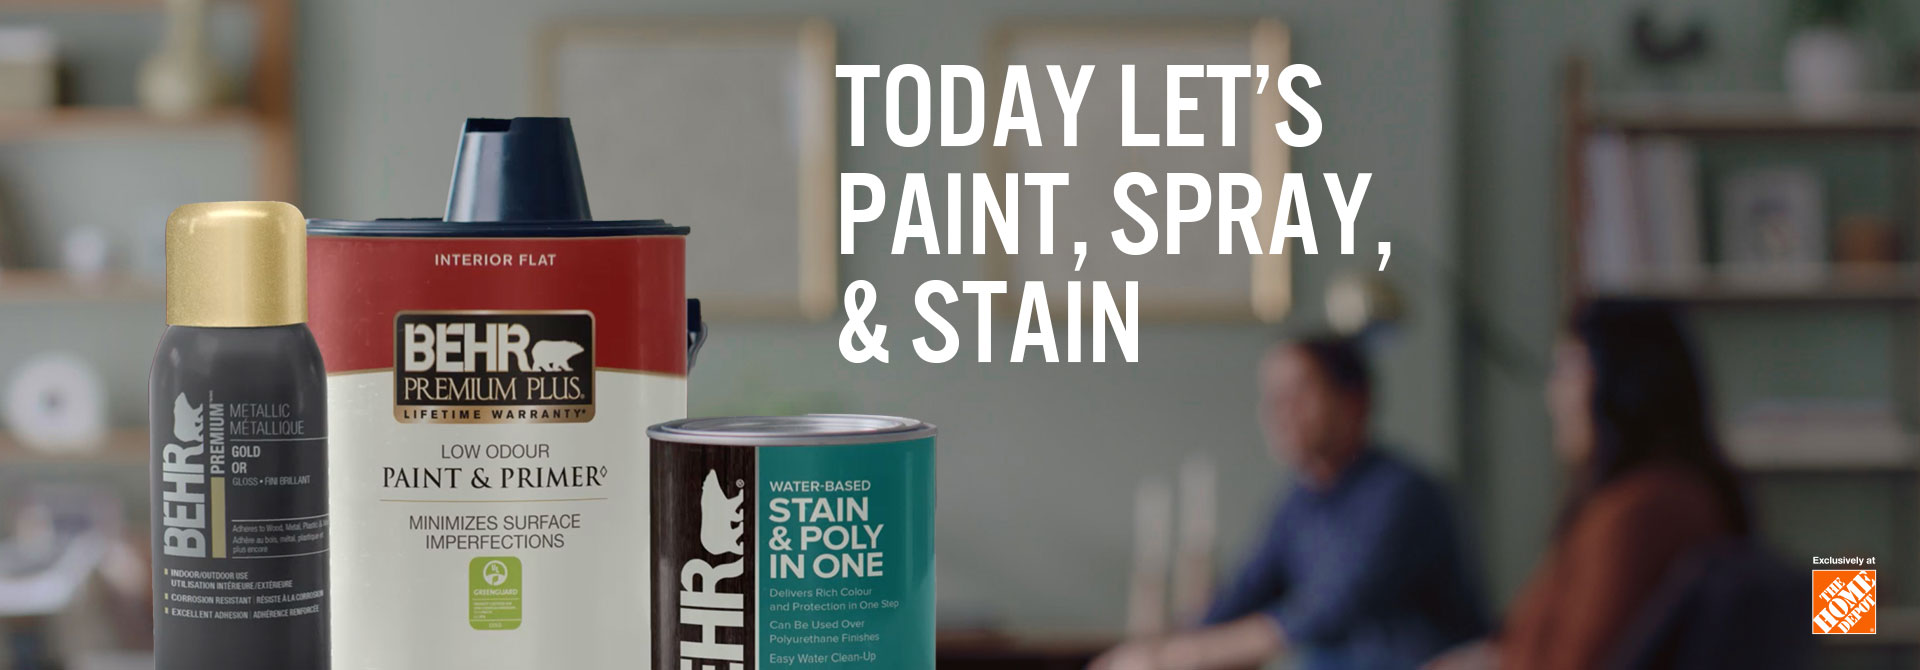 Cans of BEHR products and the words Today Let's Paint, Spray & Stain in foreground.